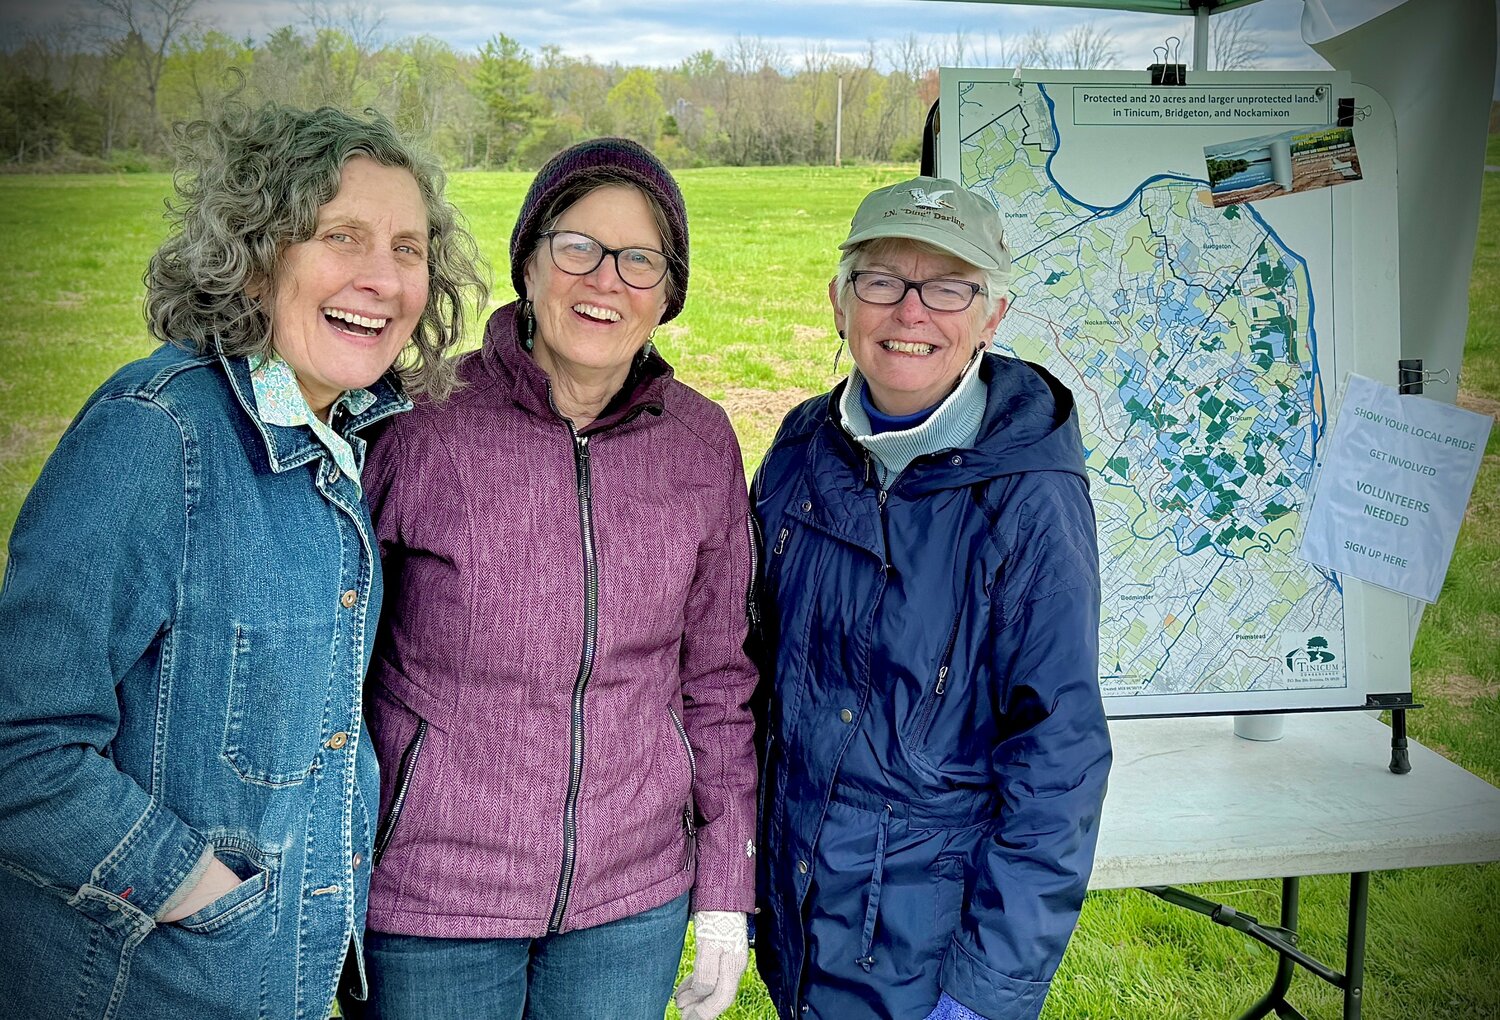 At Earth Day event, Tinicum puts its BEST foot forward The Bucks